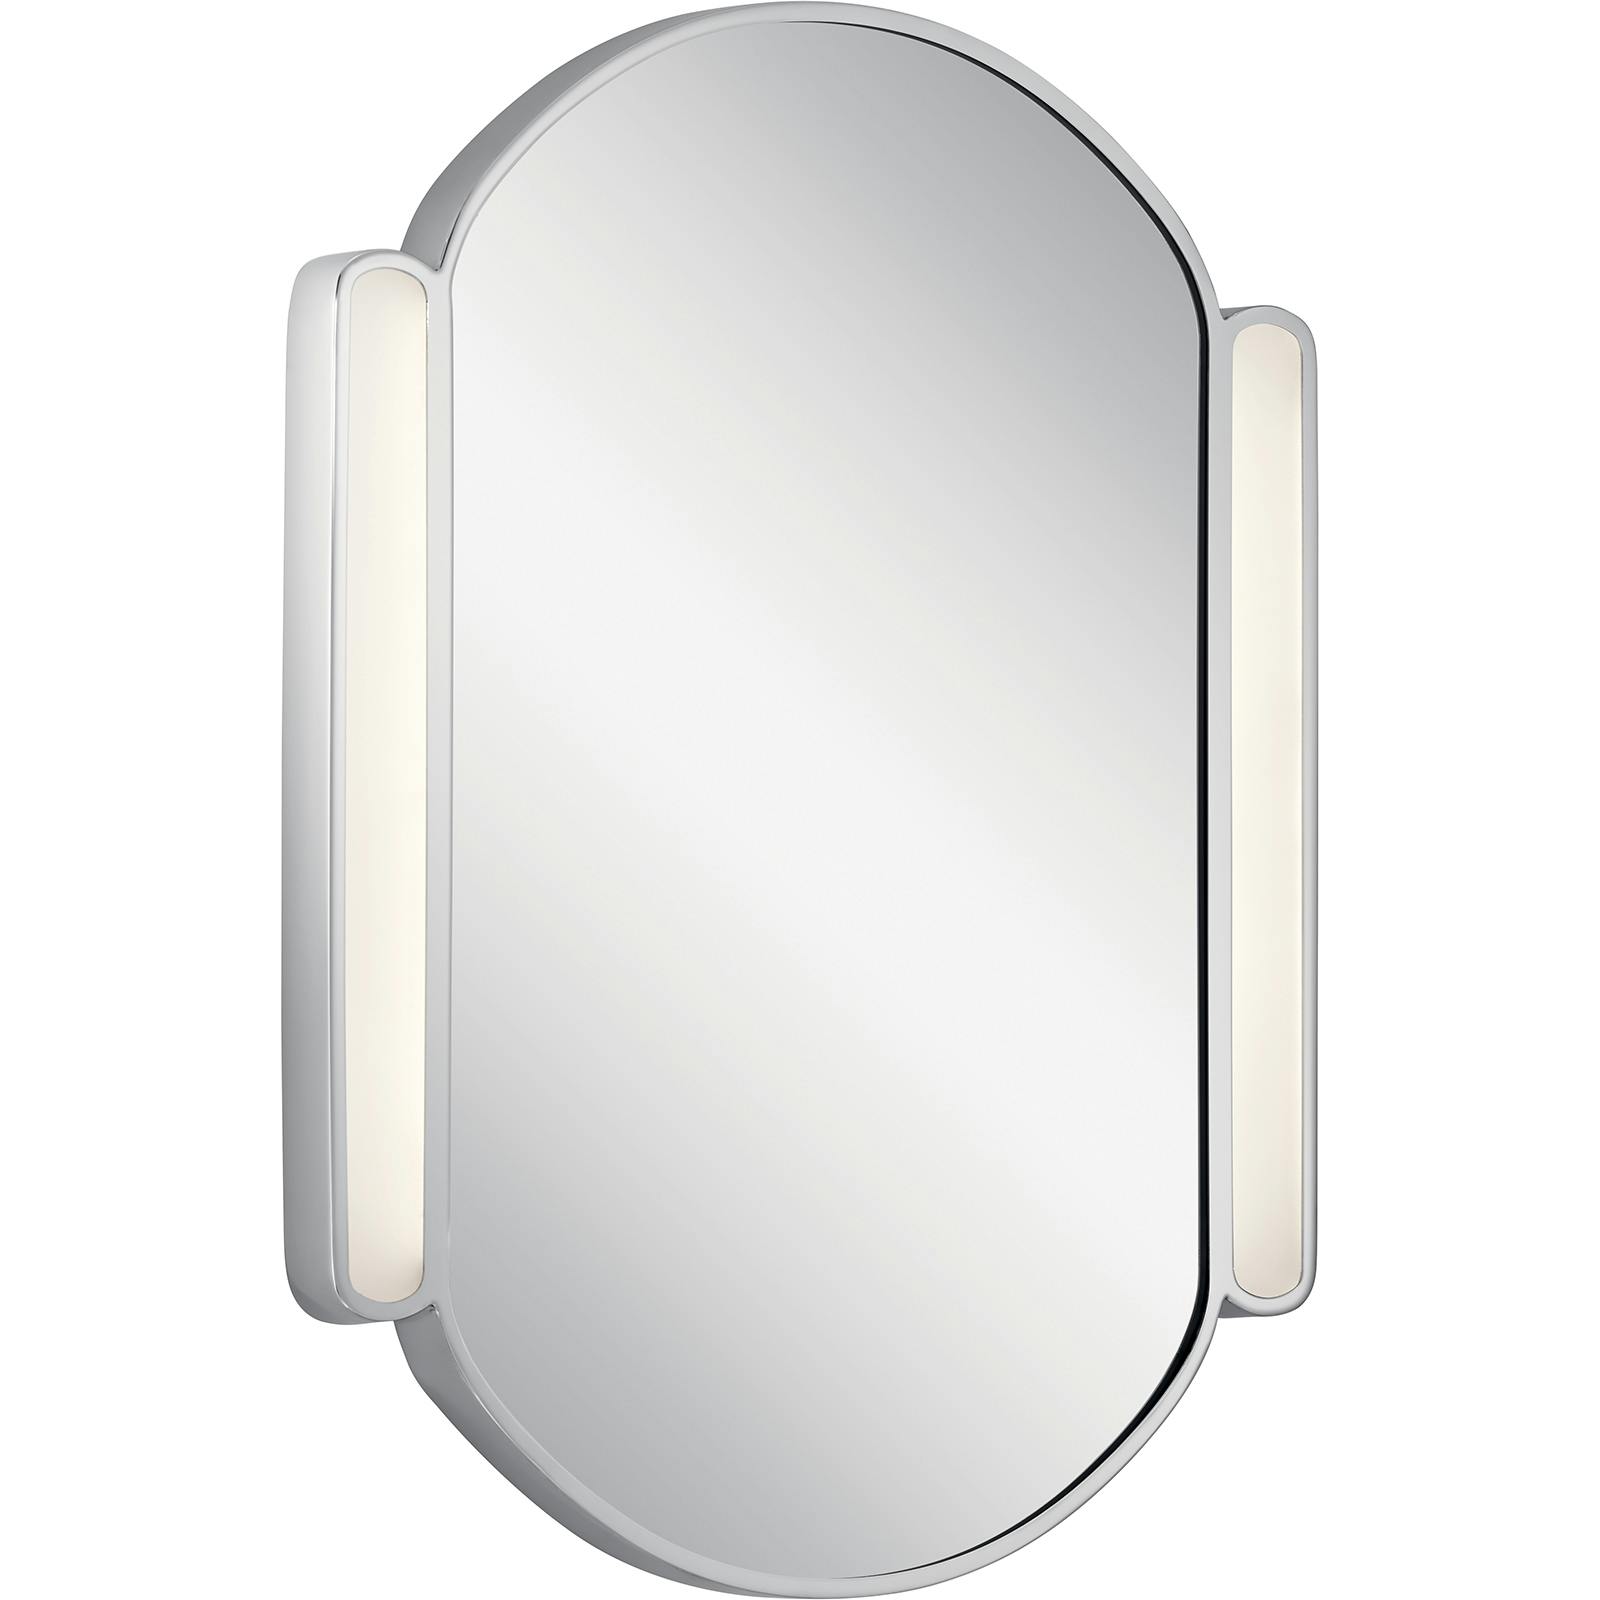 Phaelan Lighted Mirror in a Chrome finish on a white background